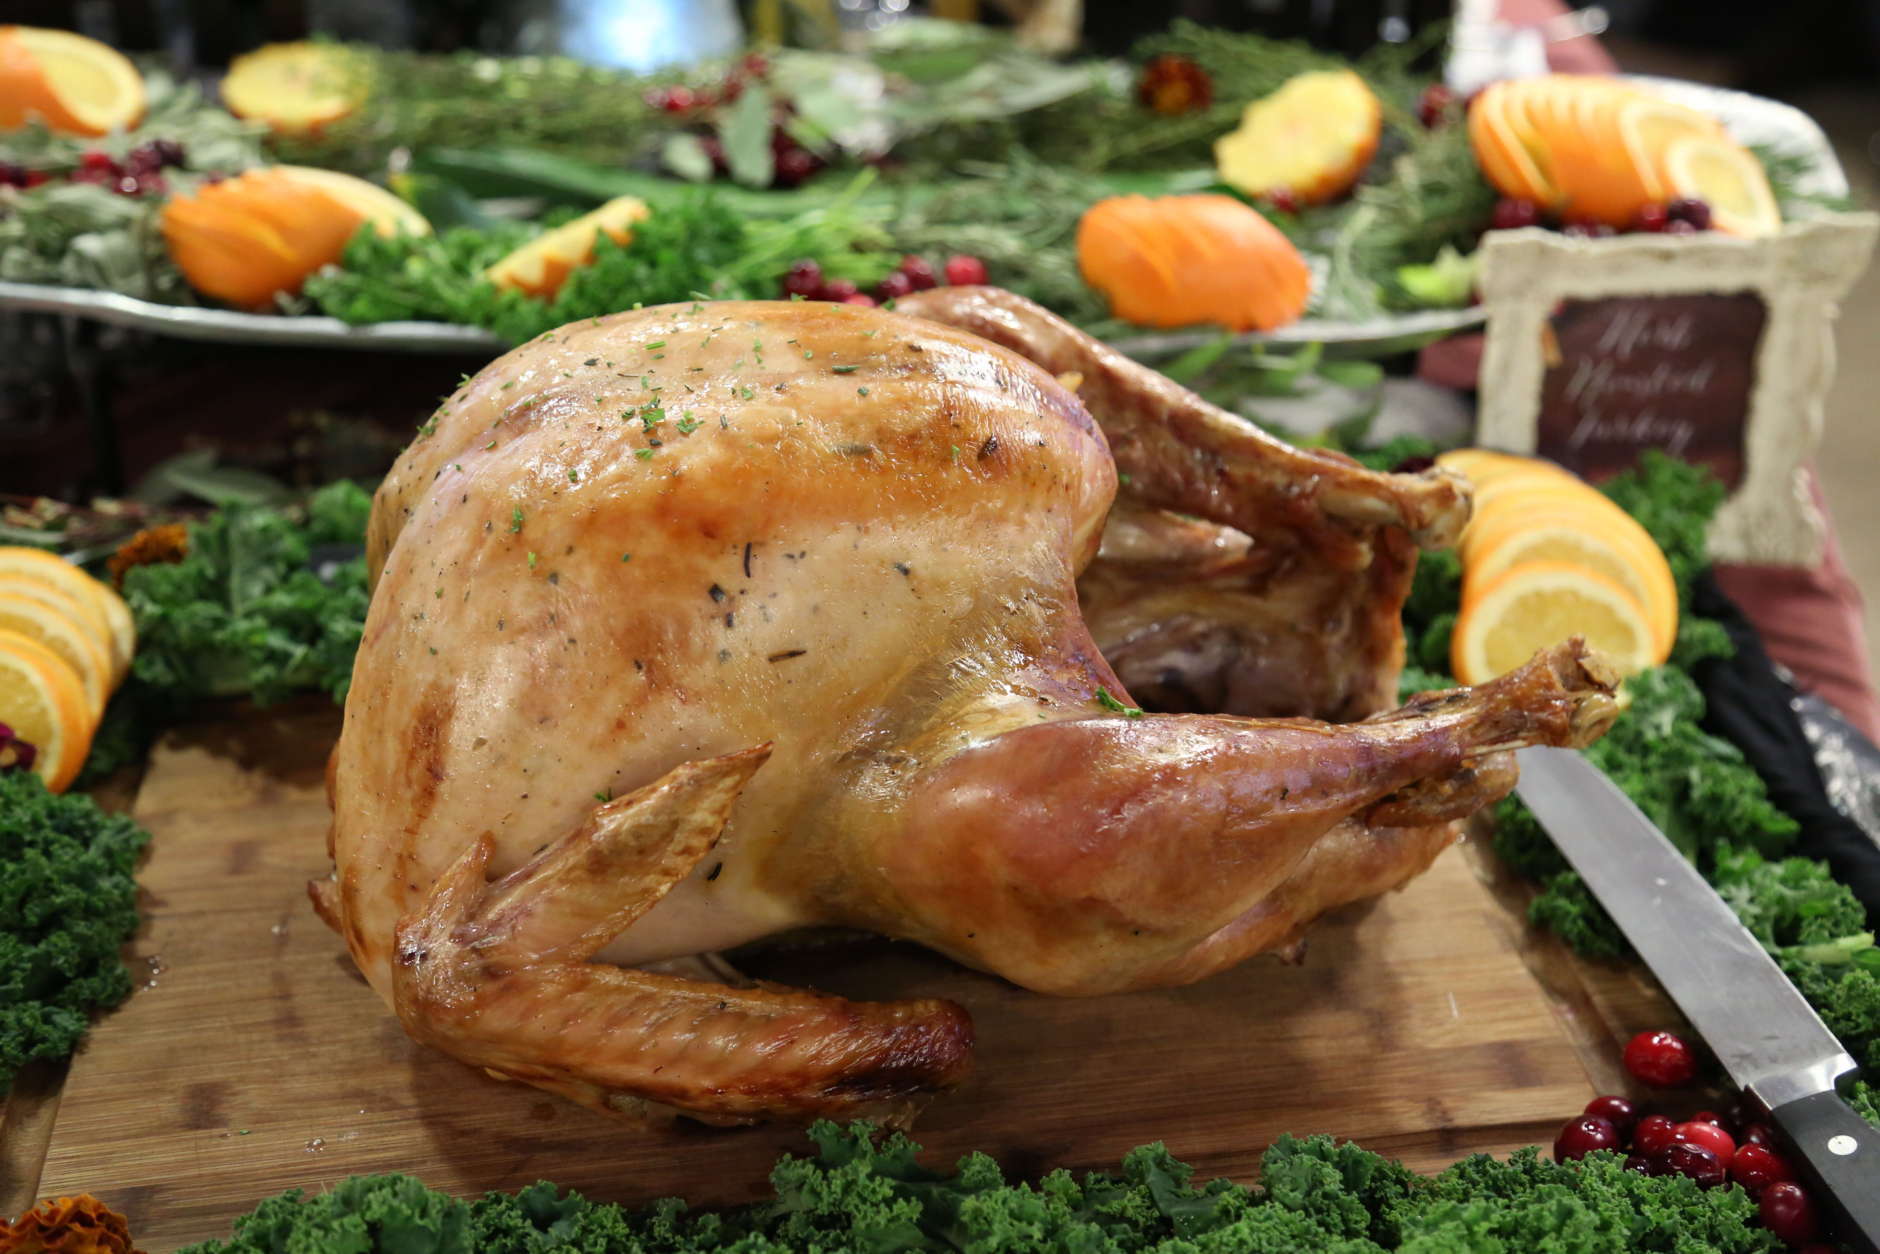 A perfectly brown and juicy turkey, made by Baer! Follow his tips and tricks to get an equally perfected turkey this holiday. (WTOP/Omama Altaleb)